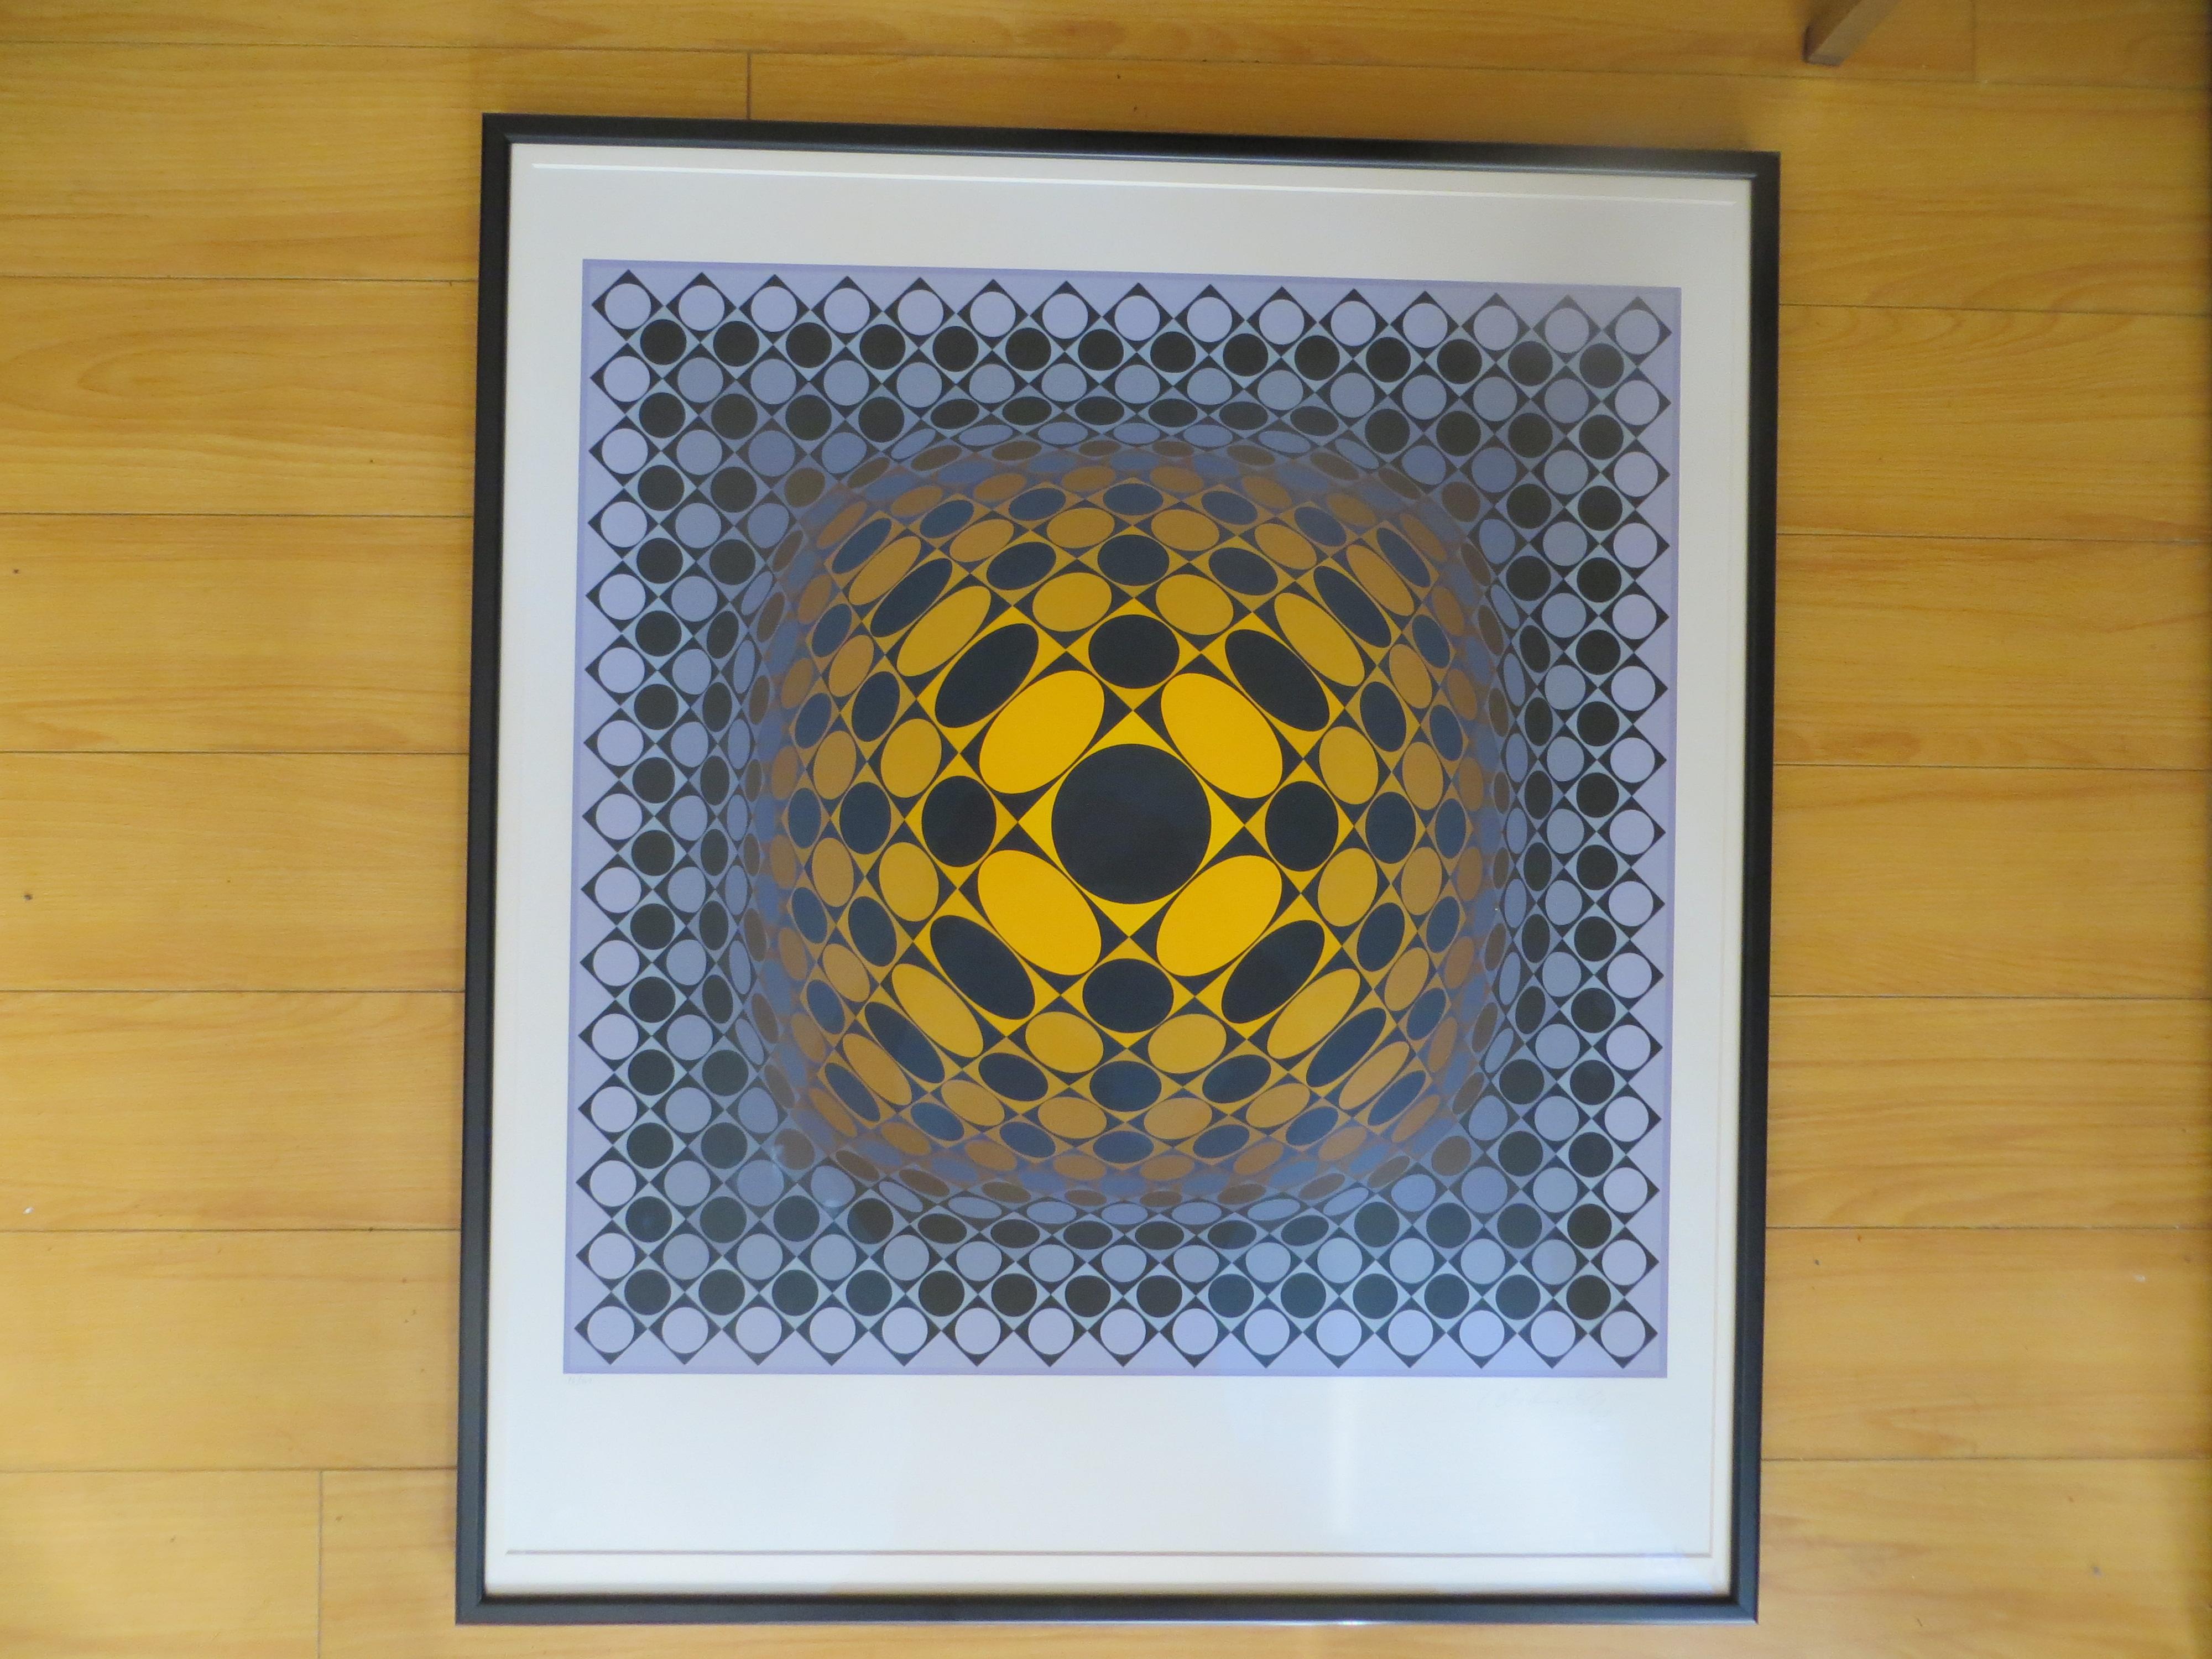 Composition Ionau, Op Art print by Victor Vasarely 1987